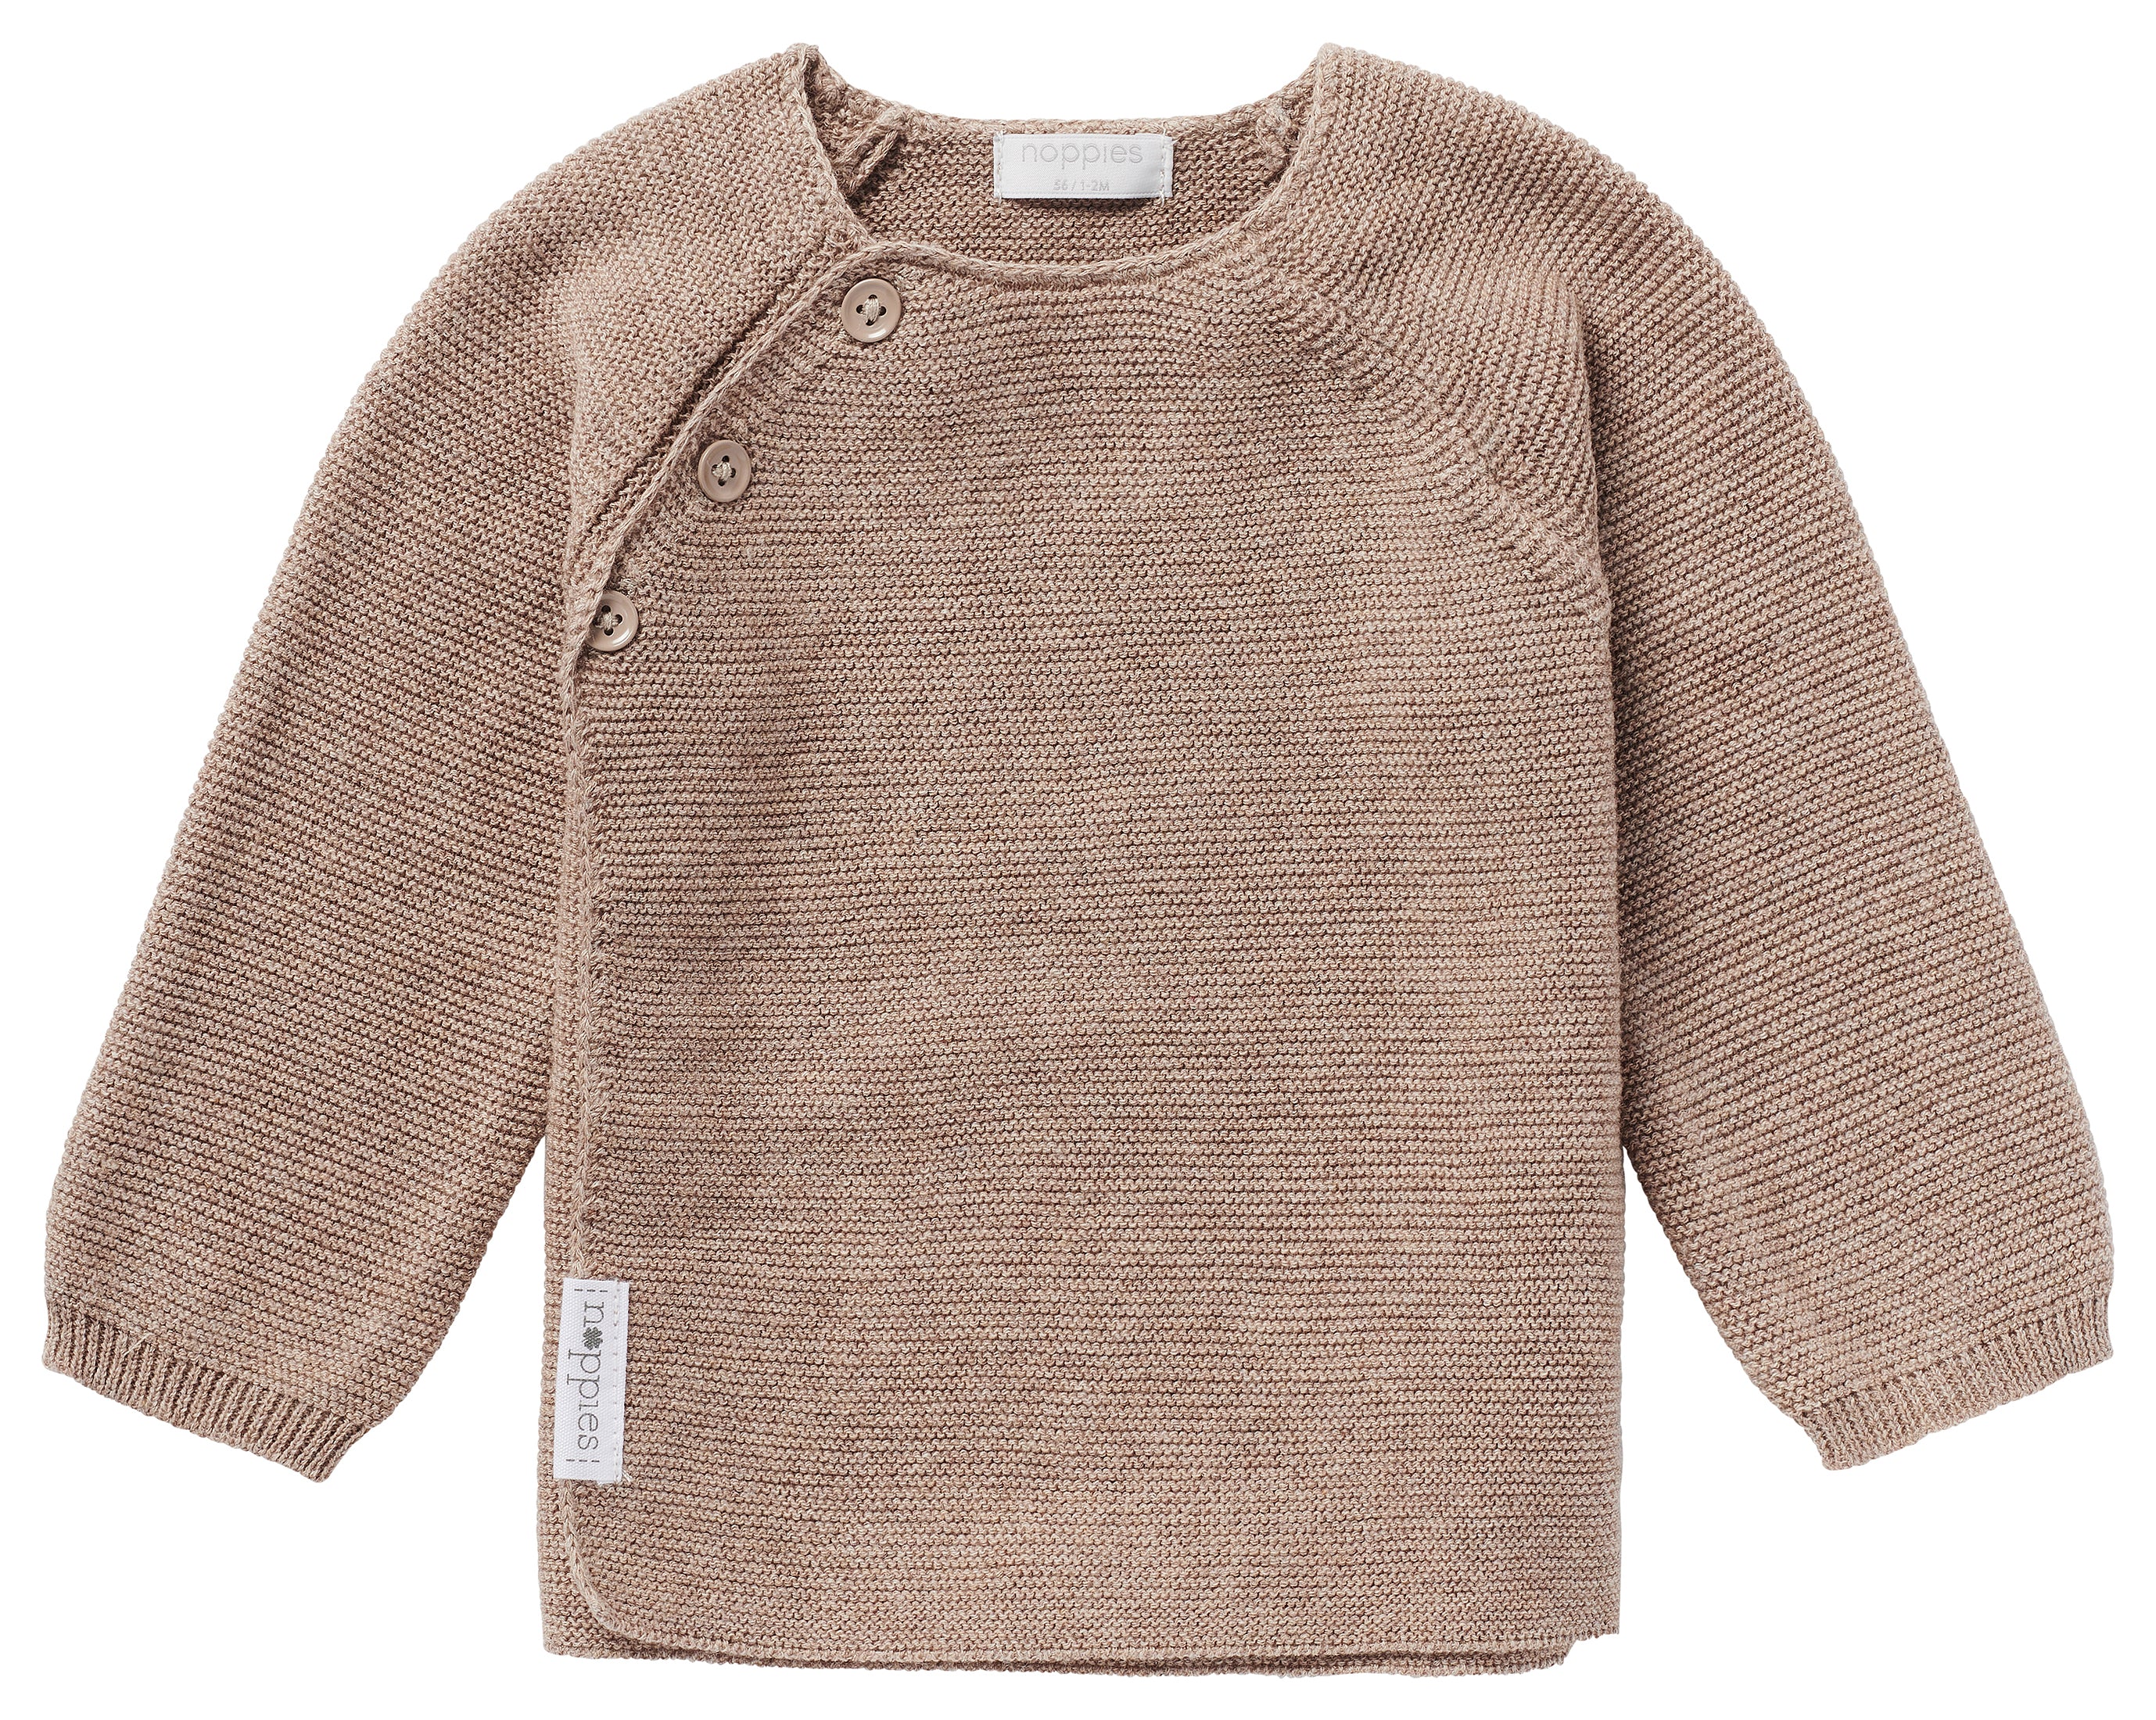 GOTS noppies Taupe Baby Cardigan Sweater. Matching Pants. Neutral Mama inspired outfit for baby. Gender Neutral Gifting. Made in Germany. Free Shipping over $100 in Canada and United States. Duties Included.